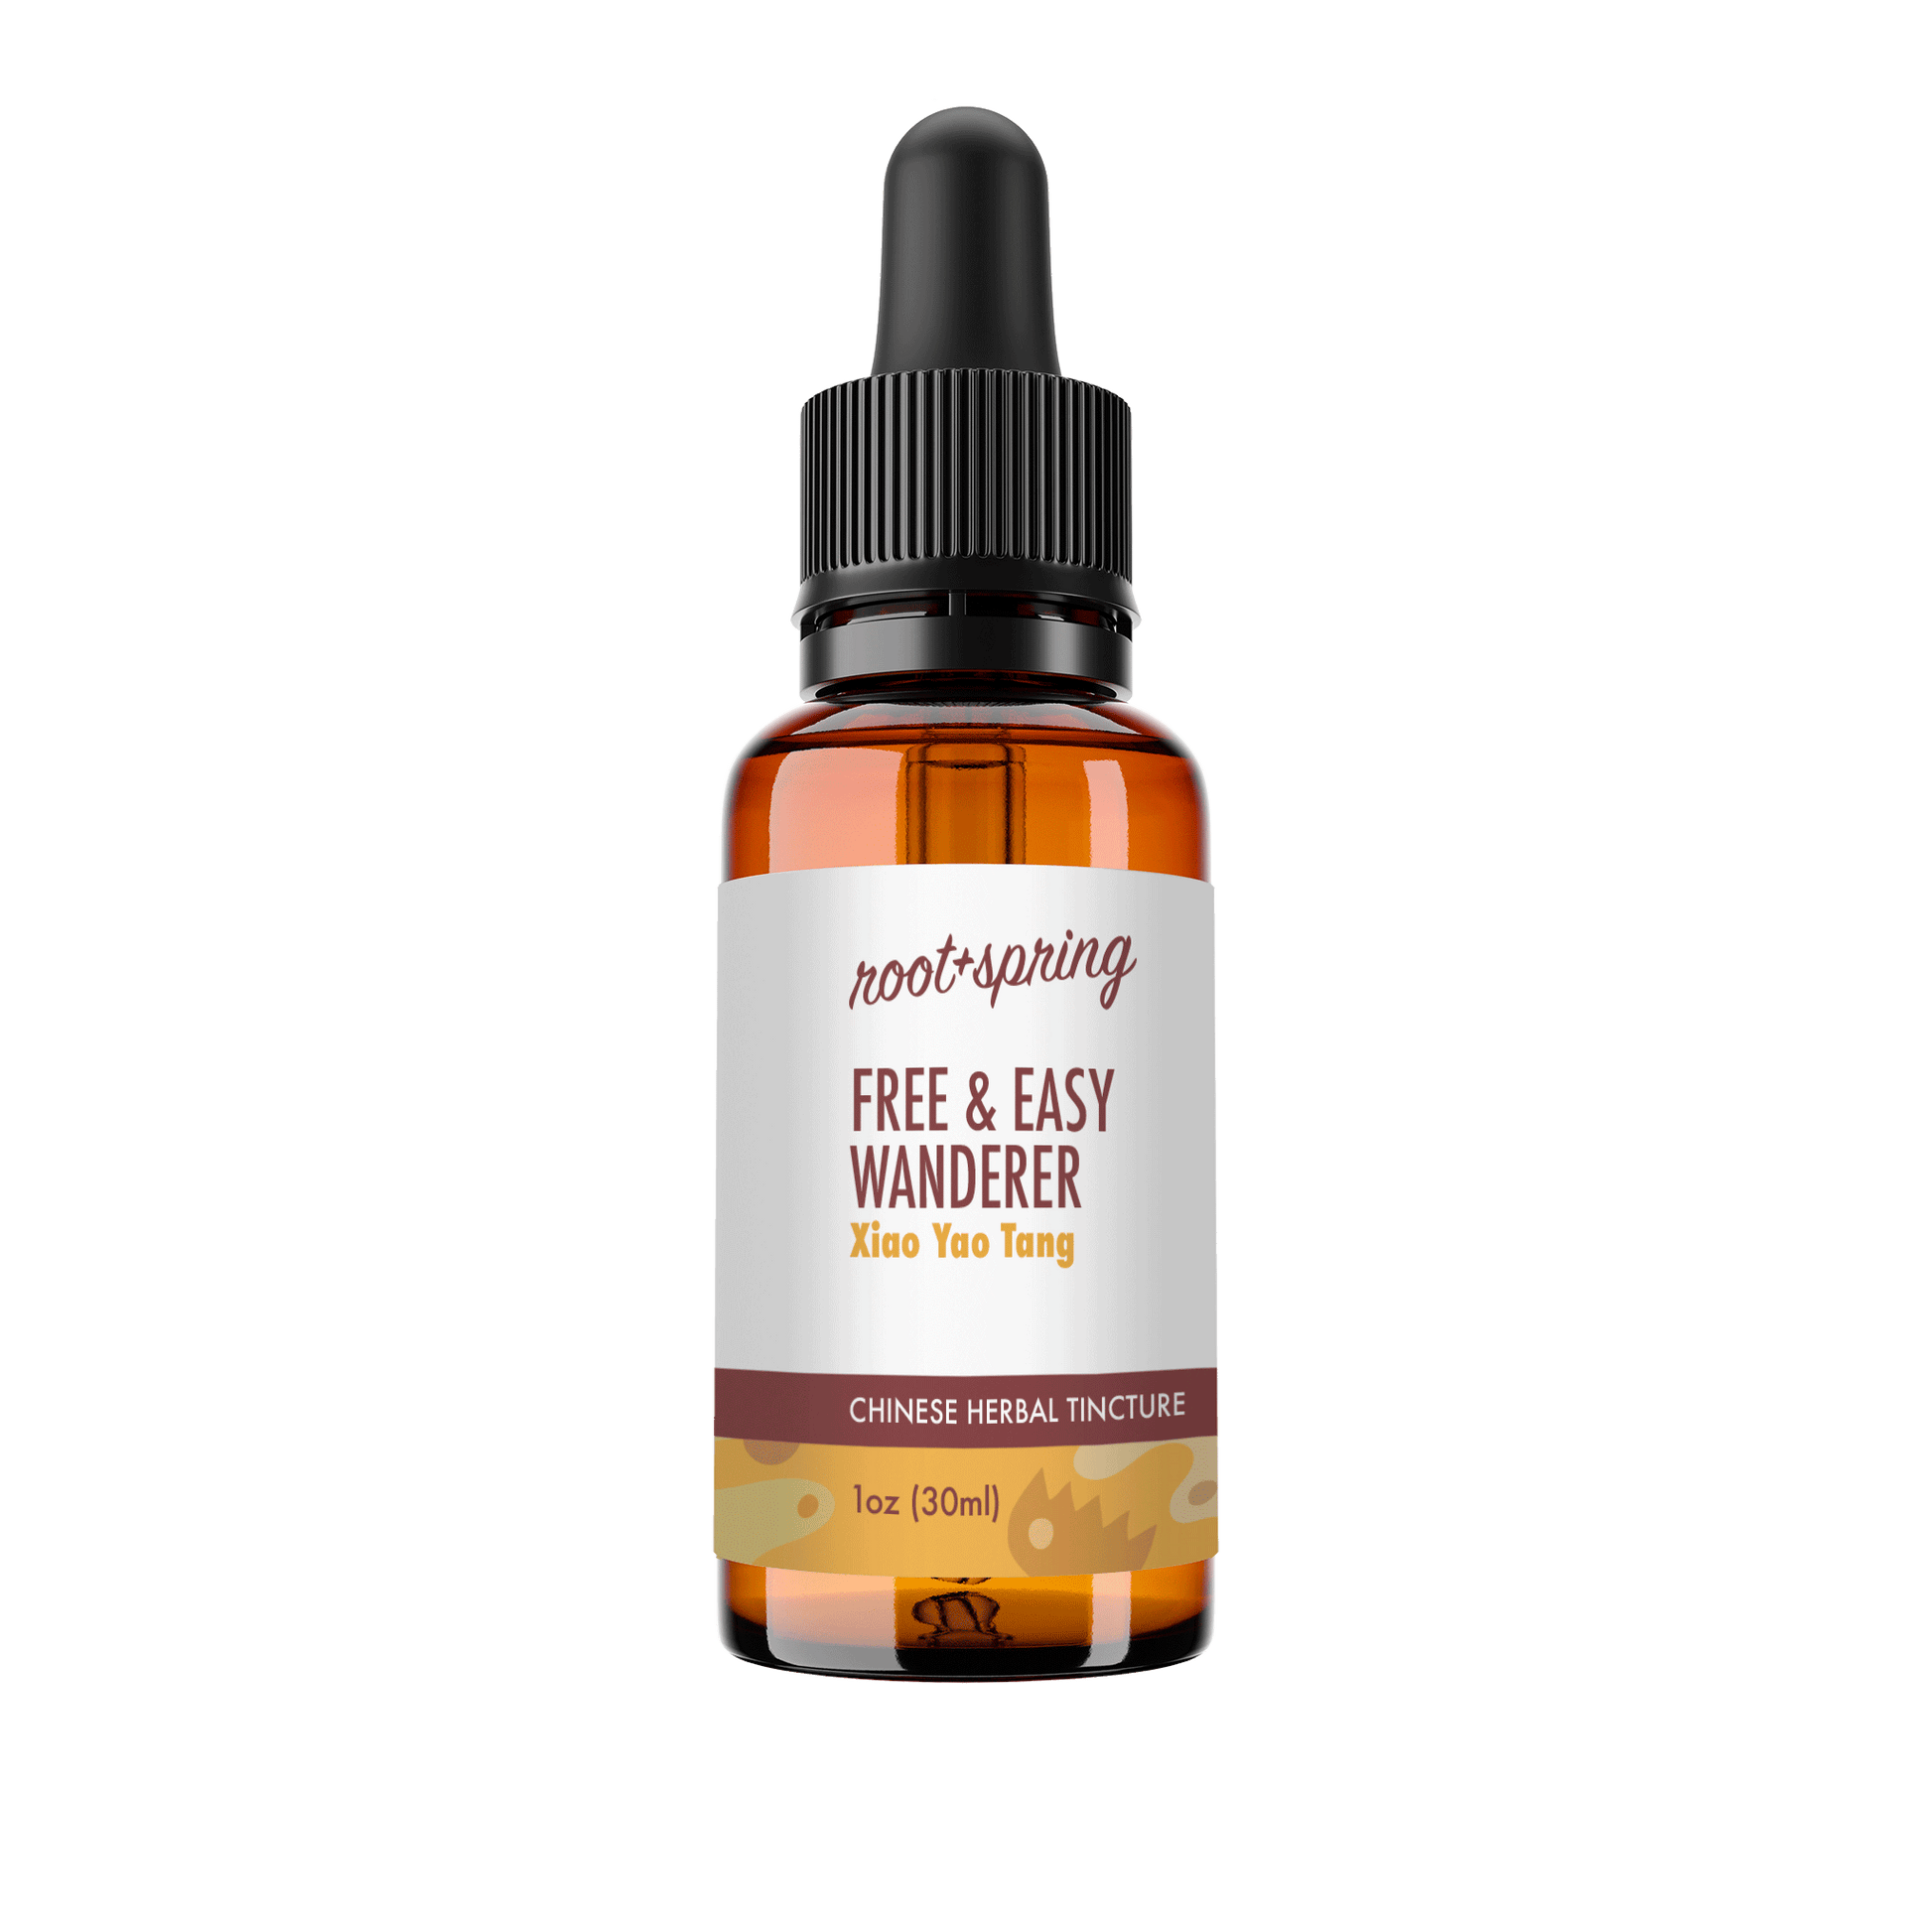 Amber eyedropper-top tincture bottle containing 1 fluid ounce (30 milliliters) of root + spring Free and Easy Wanderer Xiao Yao Tang Chinese herbal tincture.